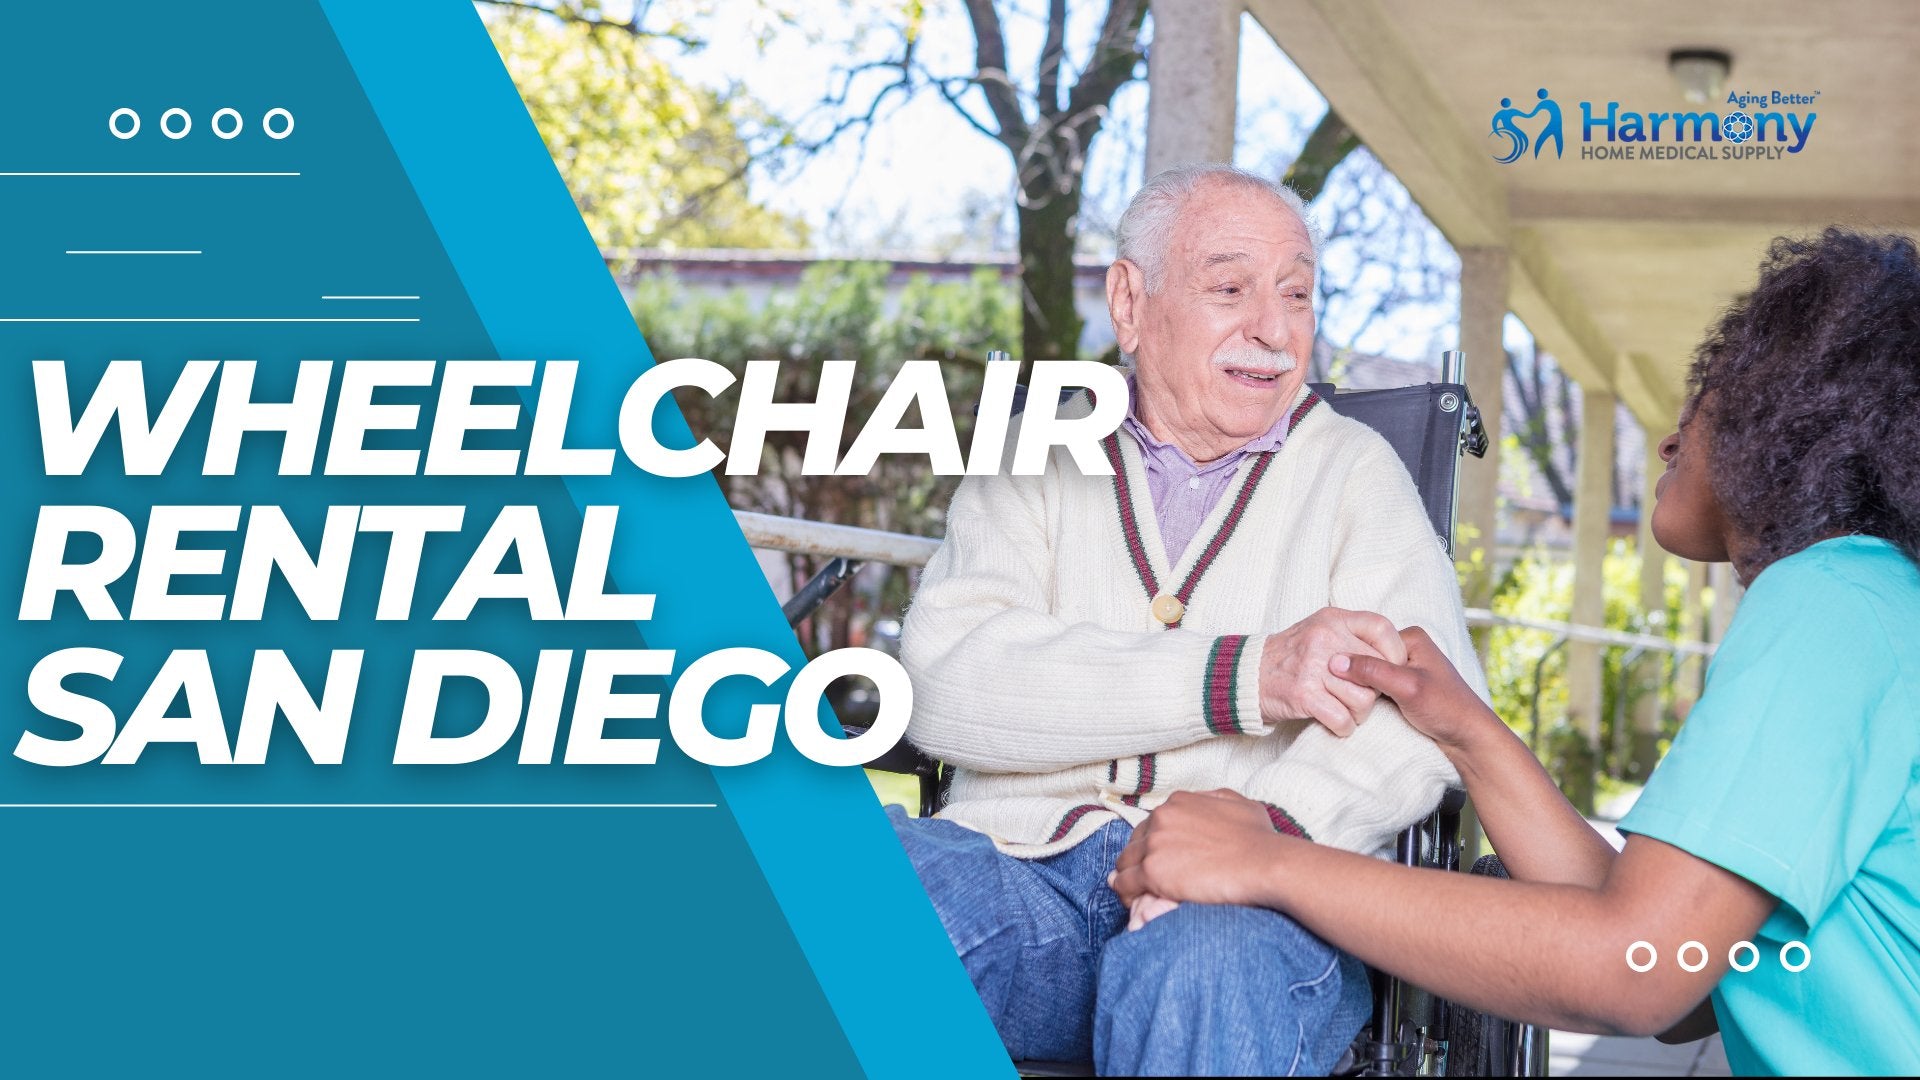 San Diego's Best Wheelchair Rental Services: Move with Confidence